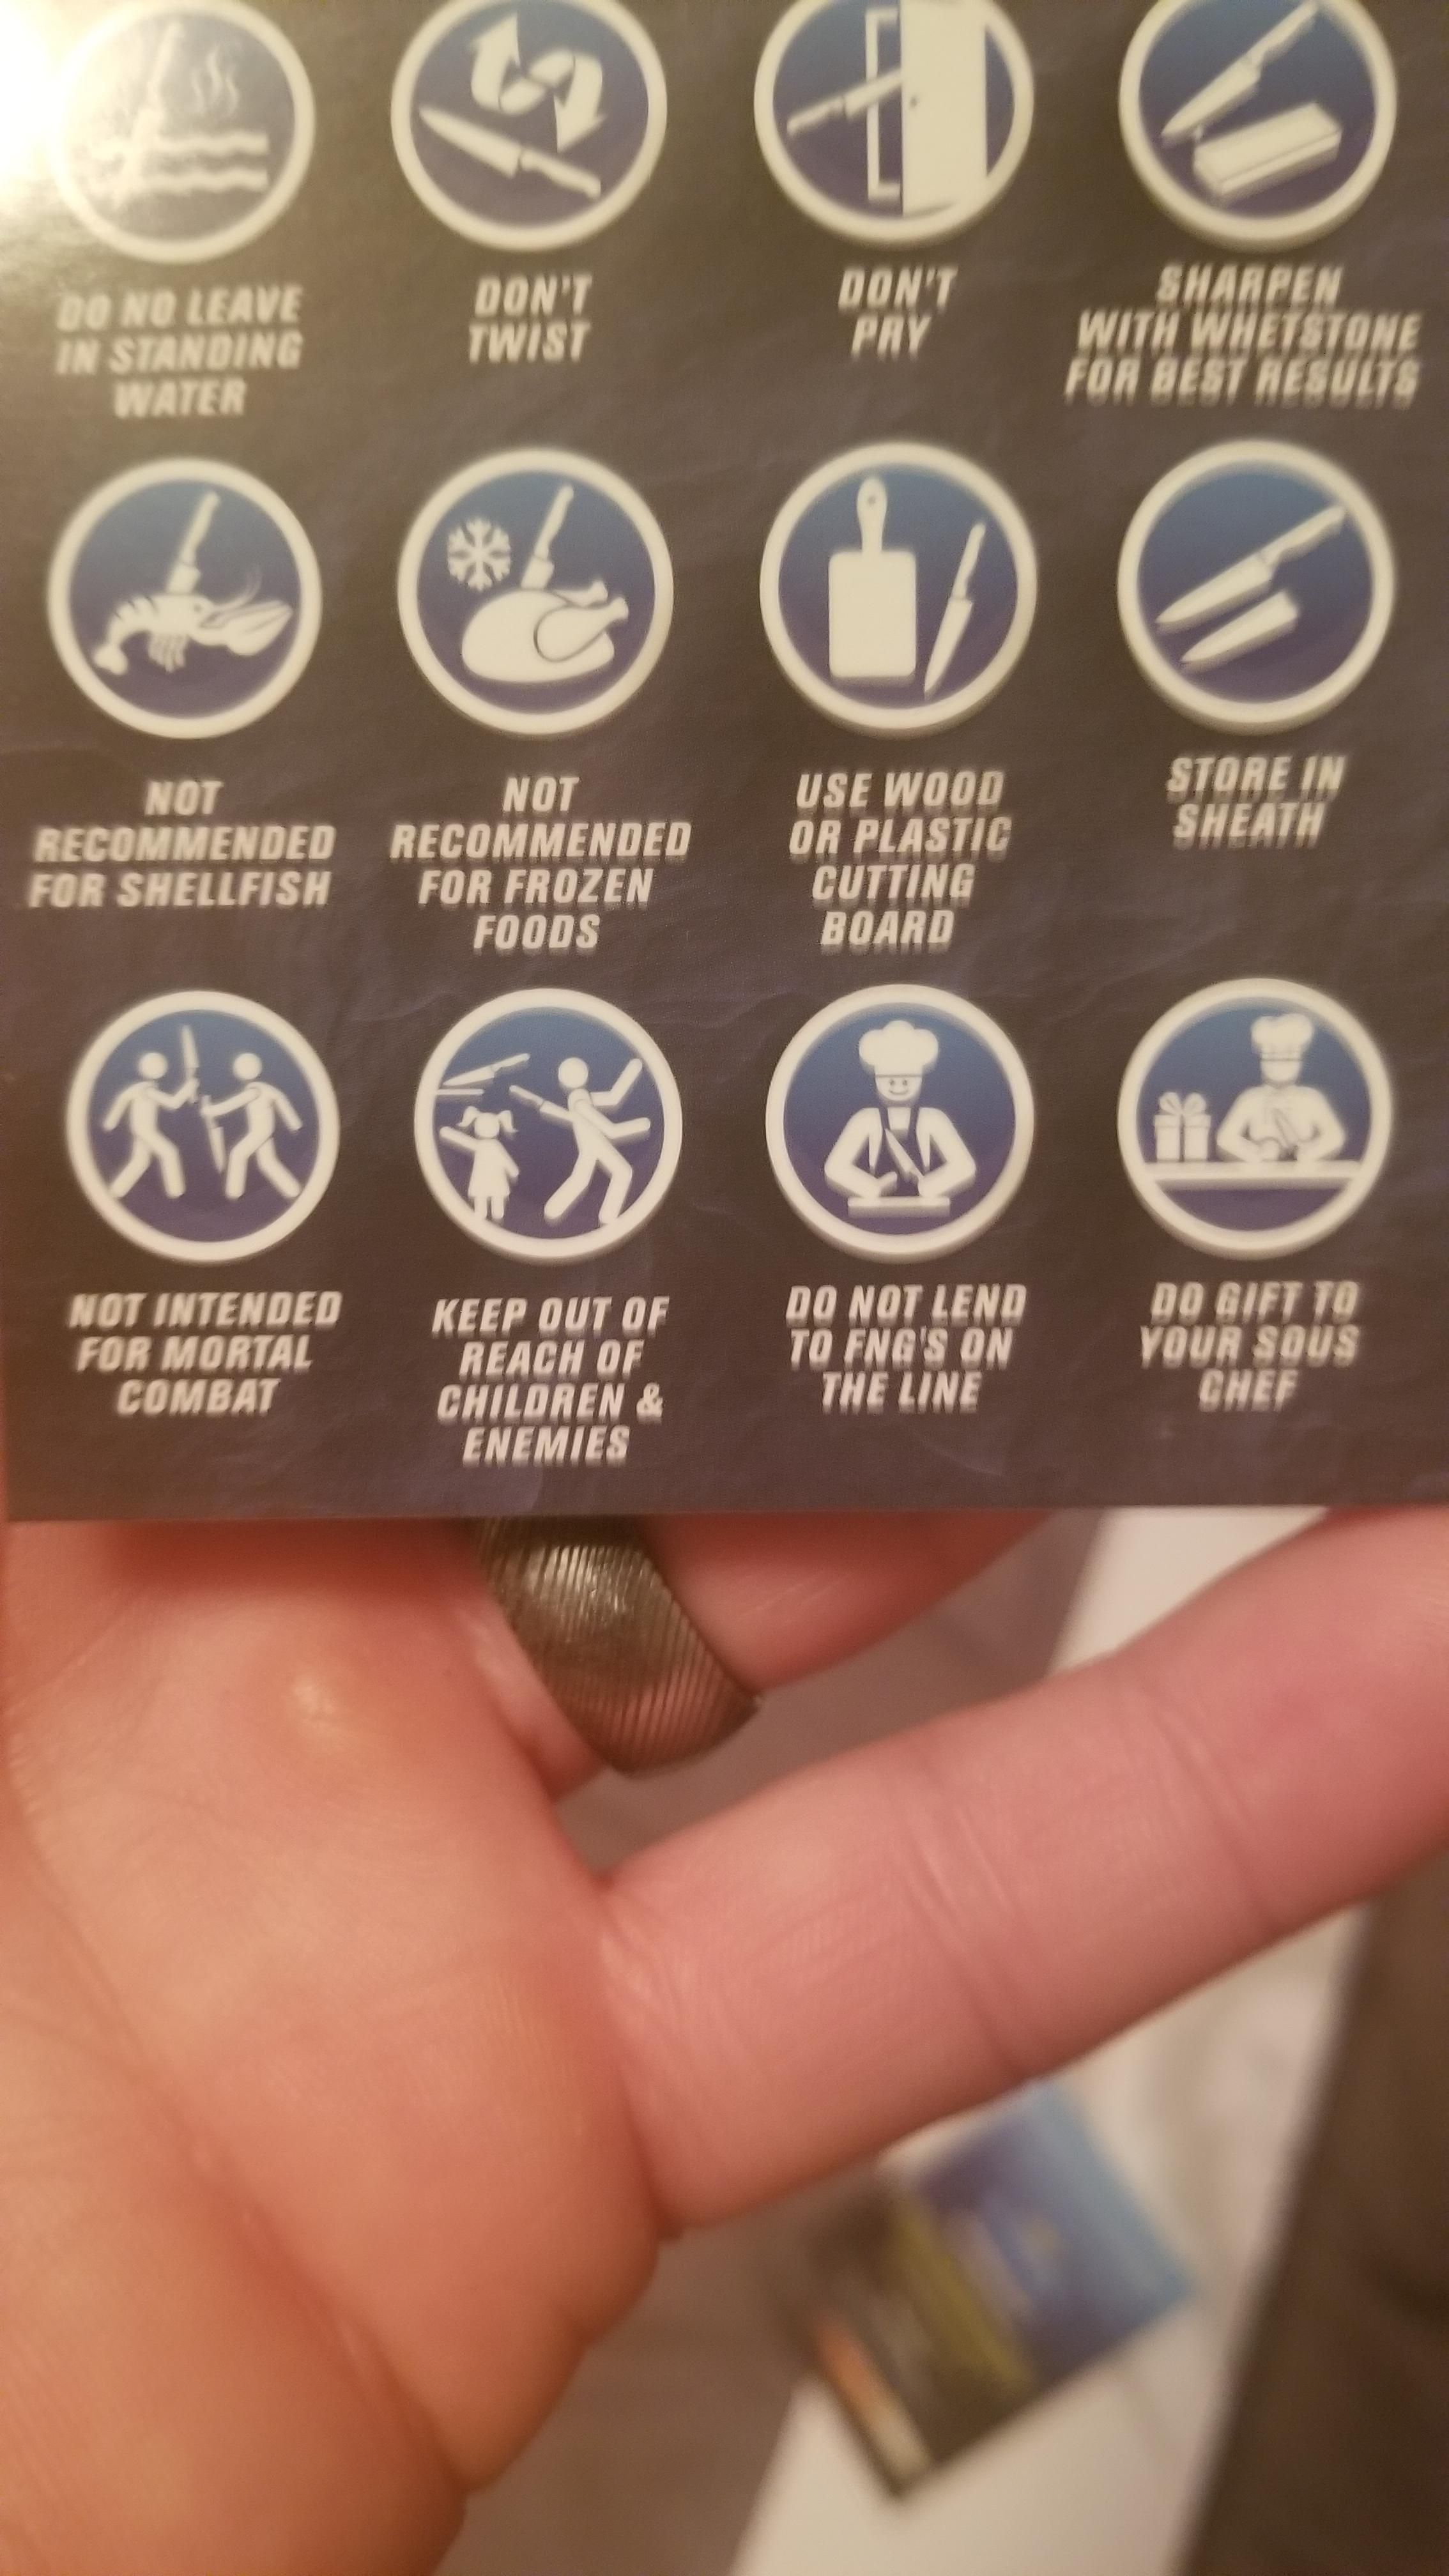 These last few guidelines for the new chef's knife my wife got me for our anniversary